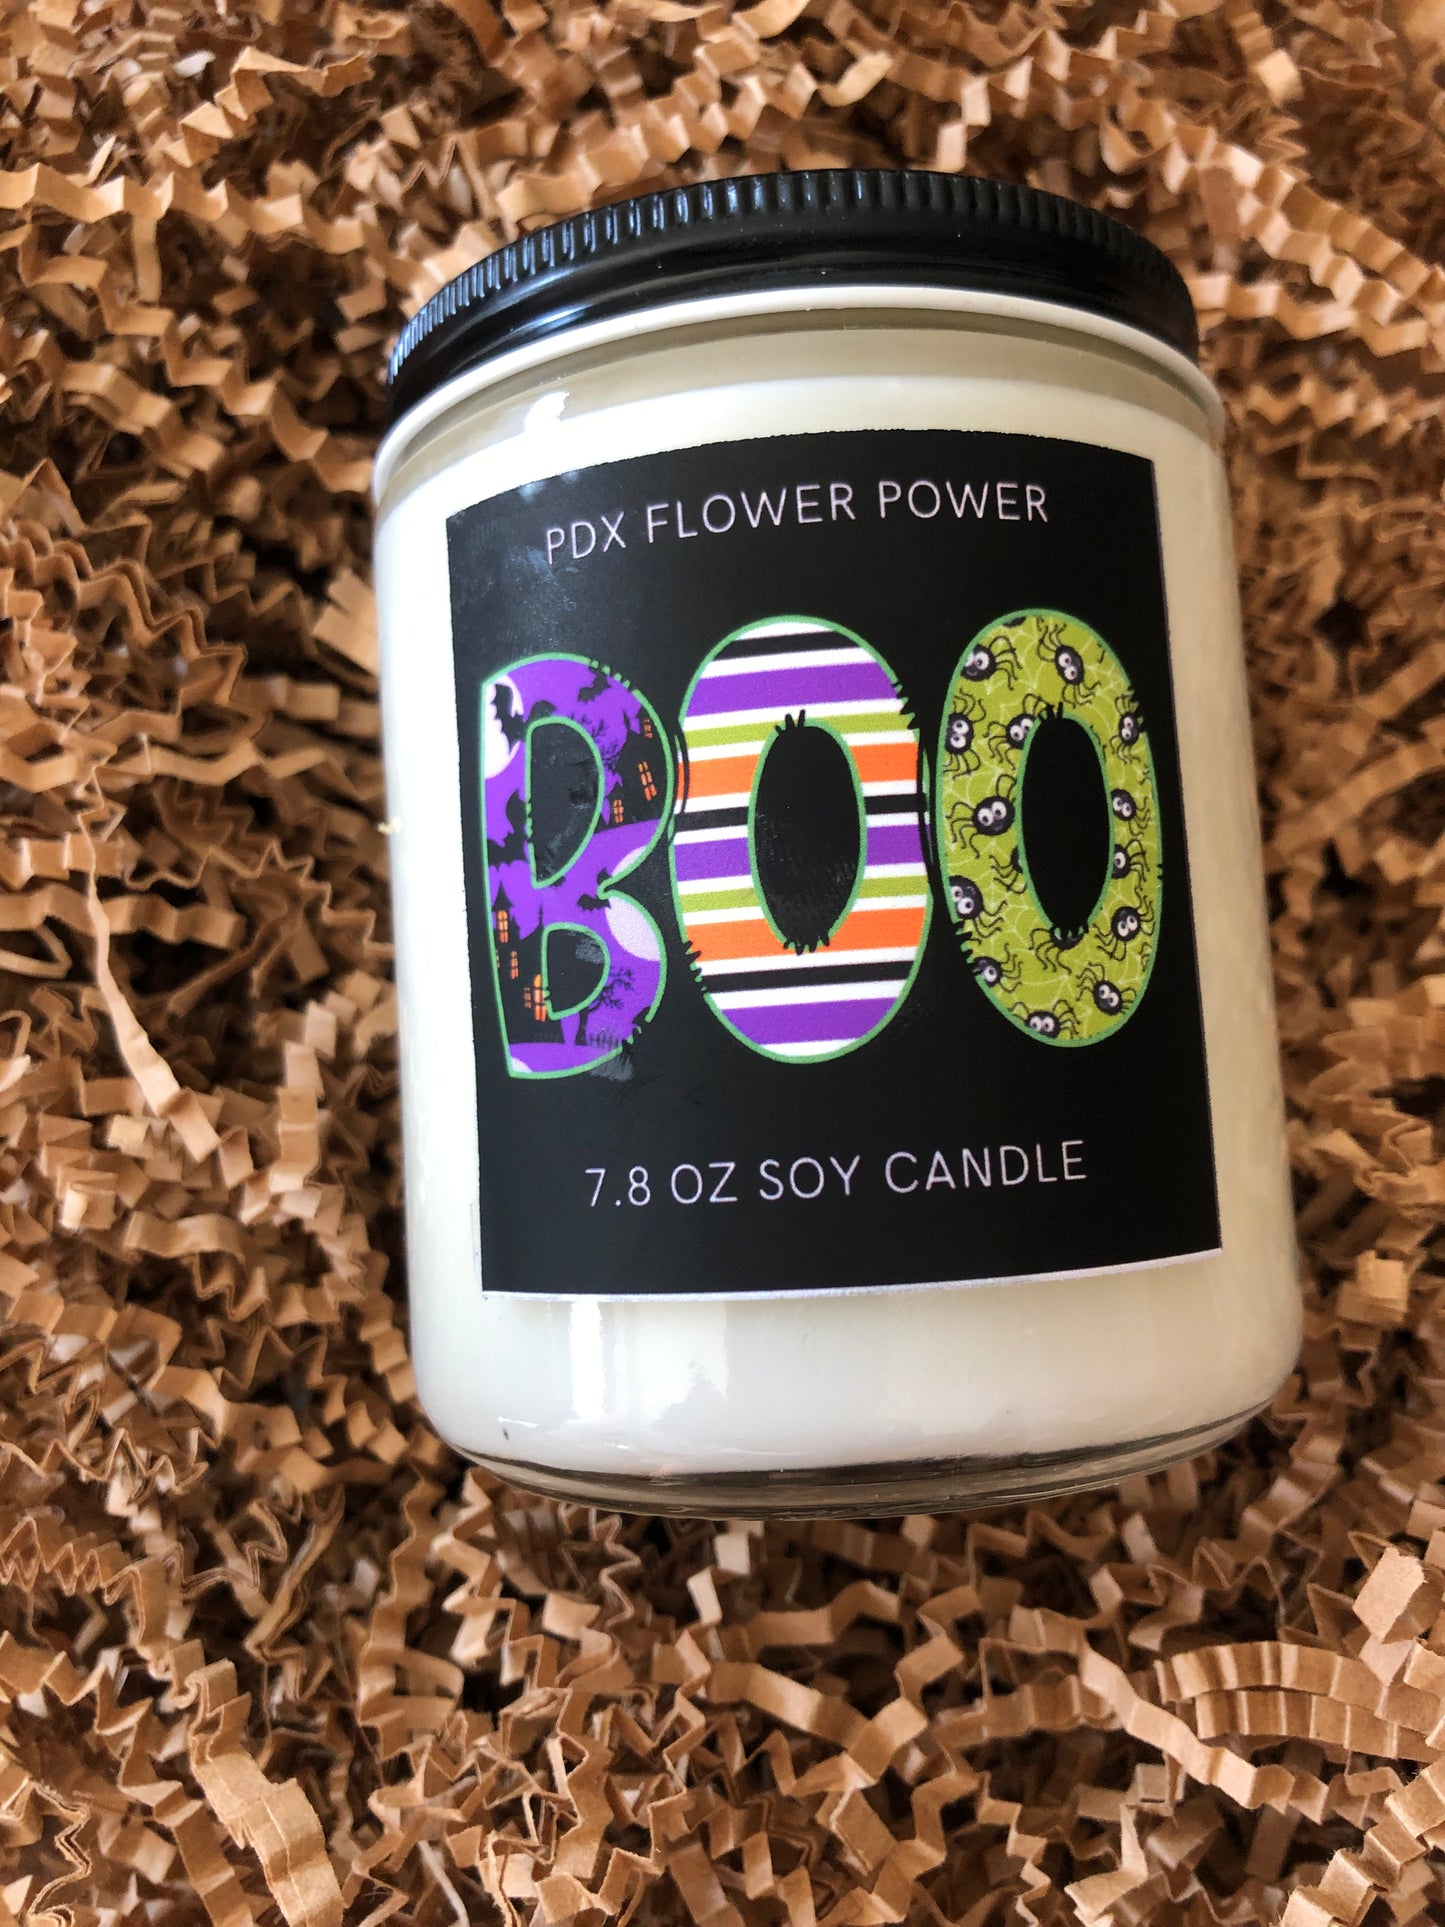 Boo Soy Candle